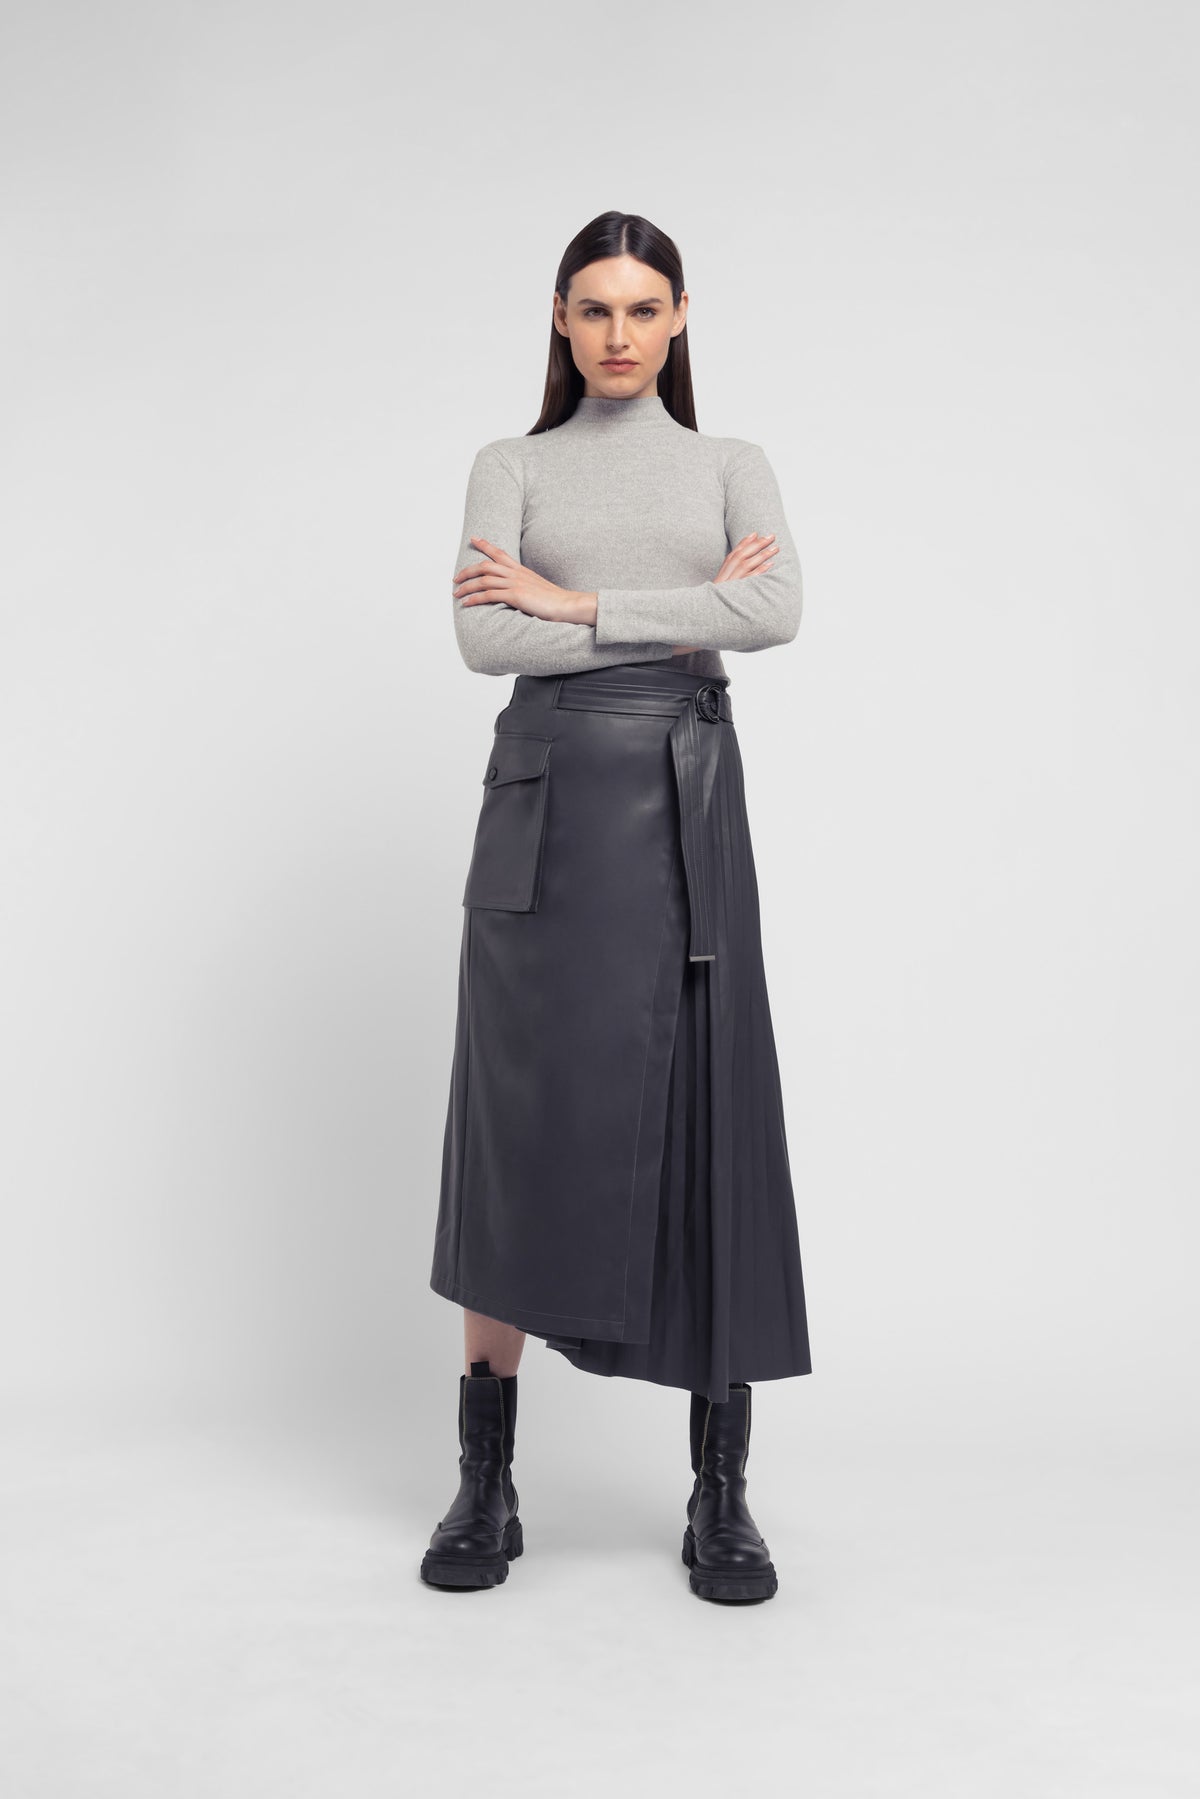 Faux Leather Skirt in Slate